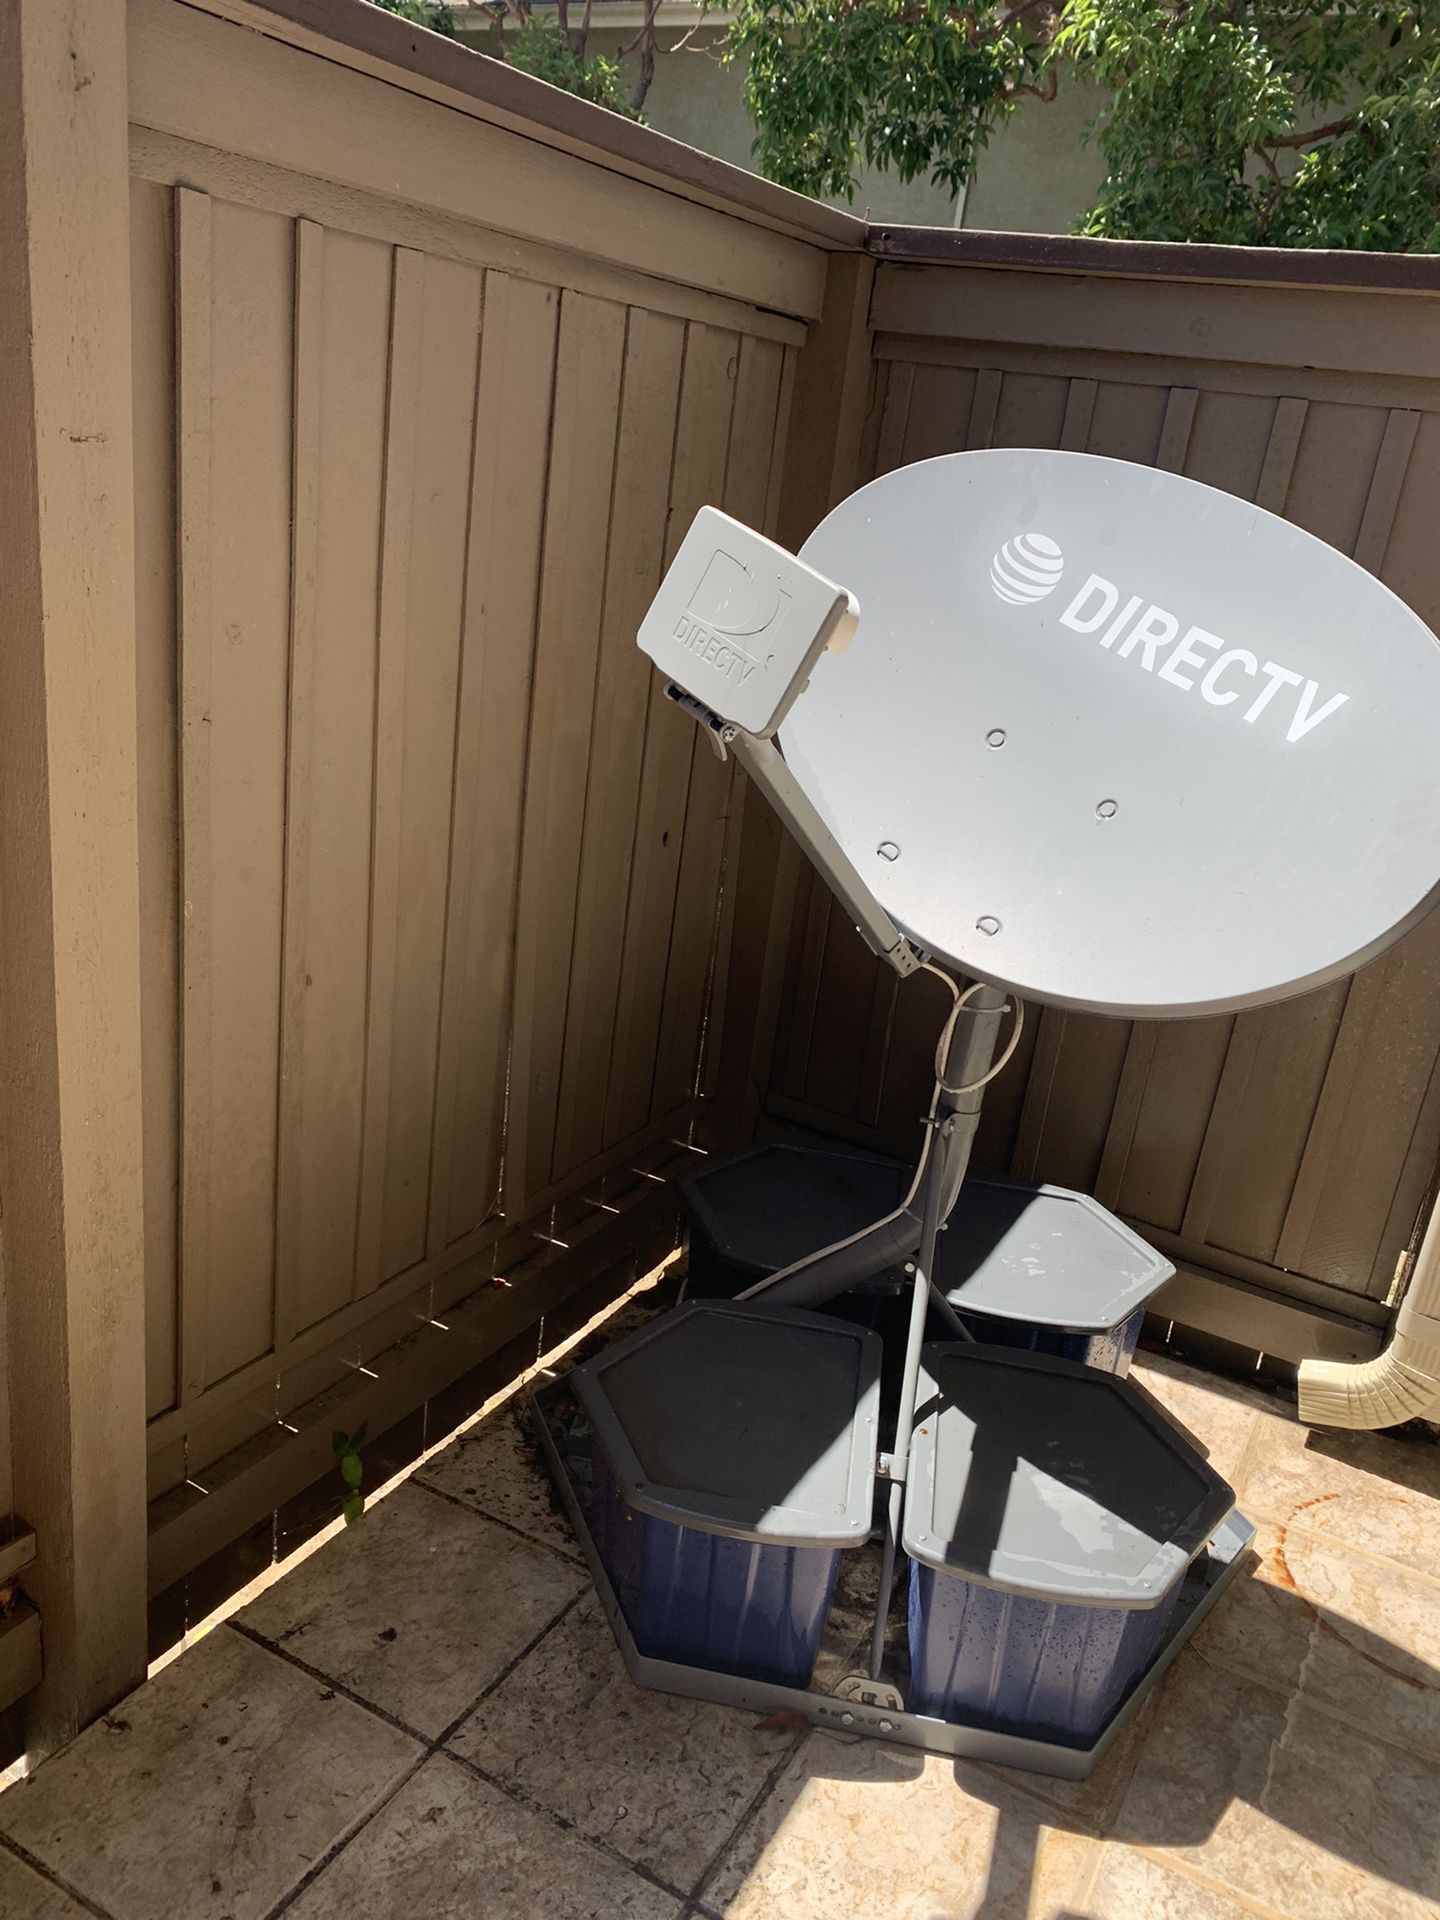 FREE Direct TV Satellite- NEEDS TO BE PICKED UP THIS WEEKEND